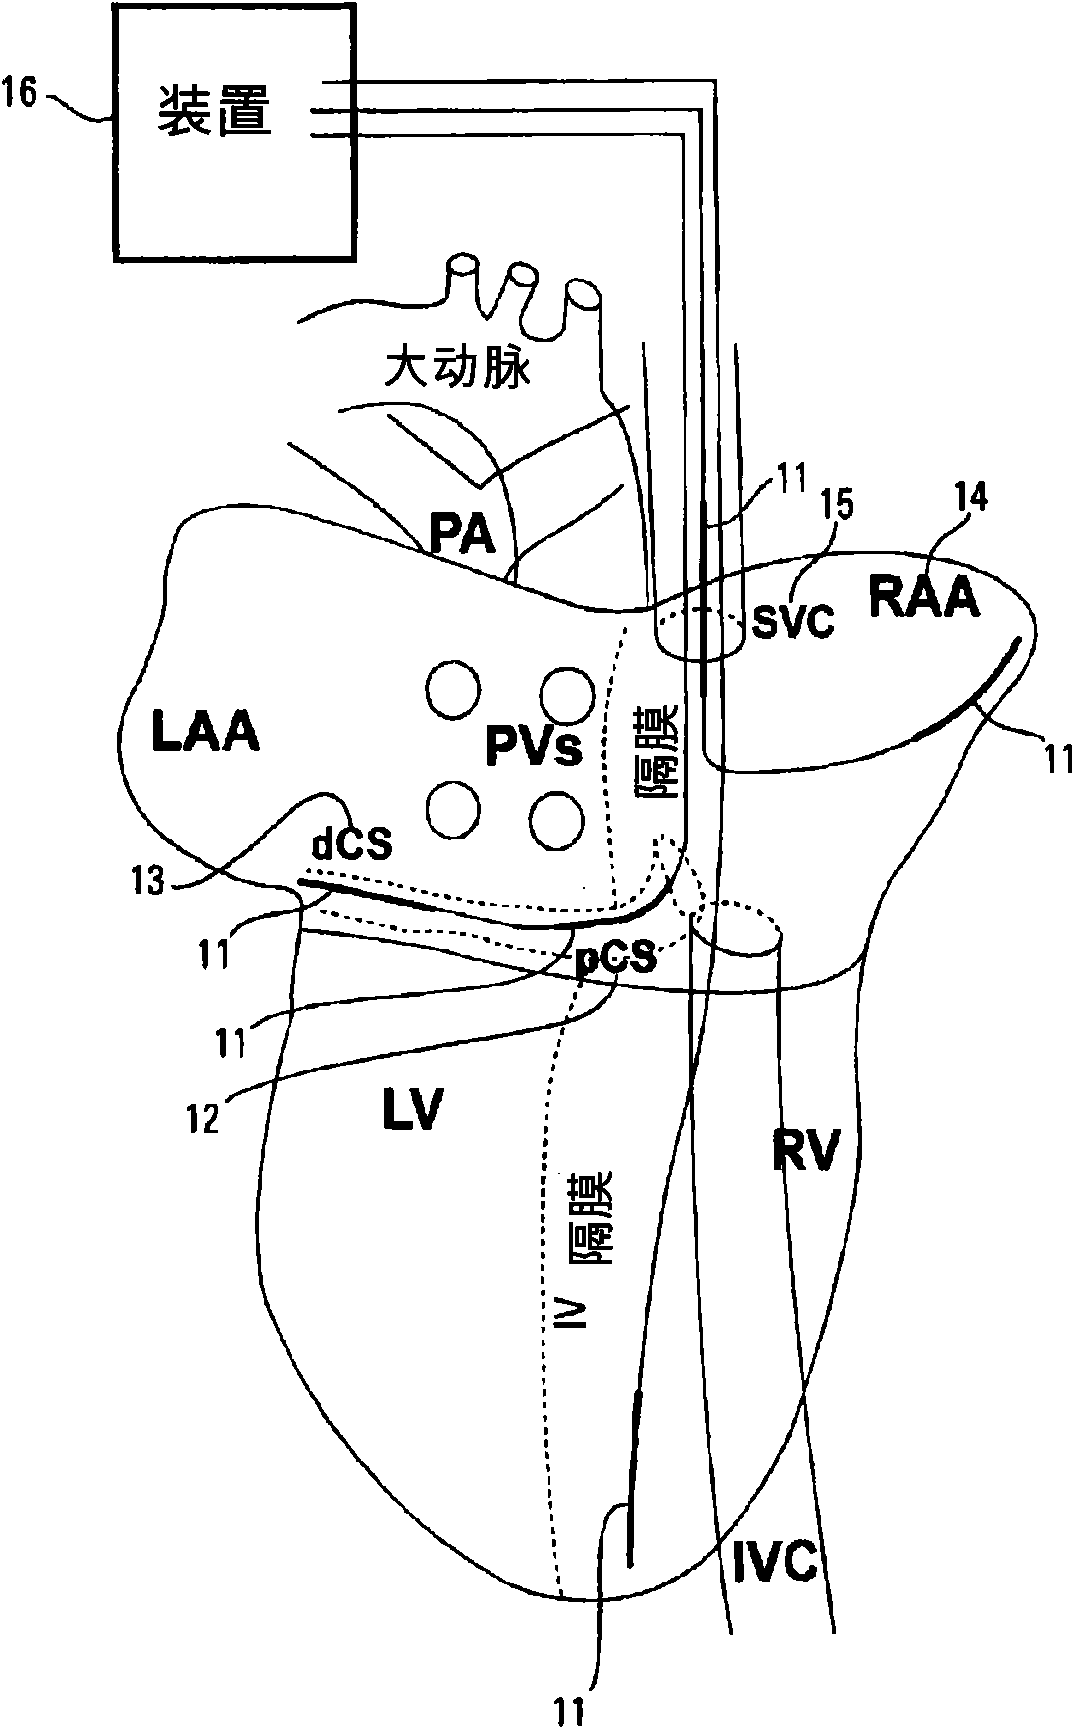 Method and device for low-energy termination of atrial tachyarrhythmias